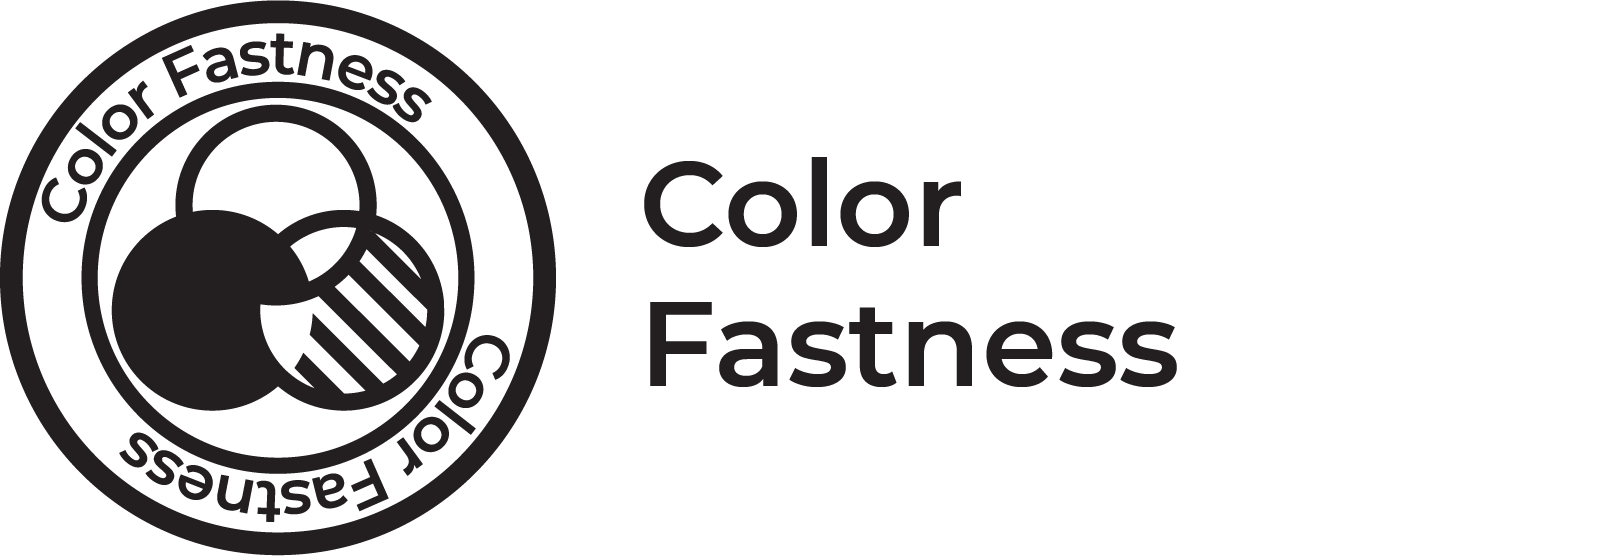 Color Fastness